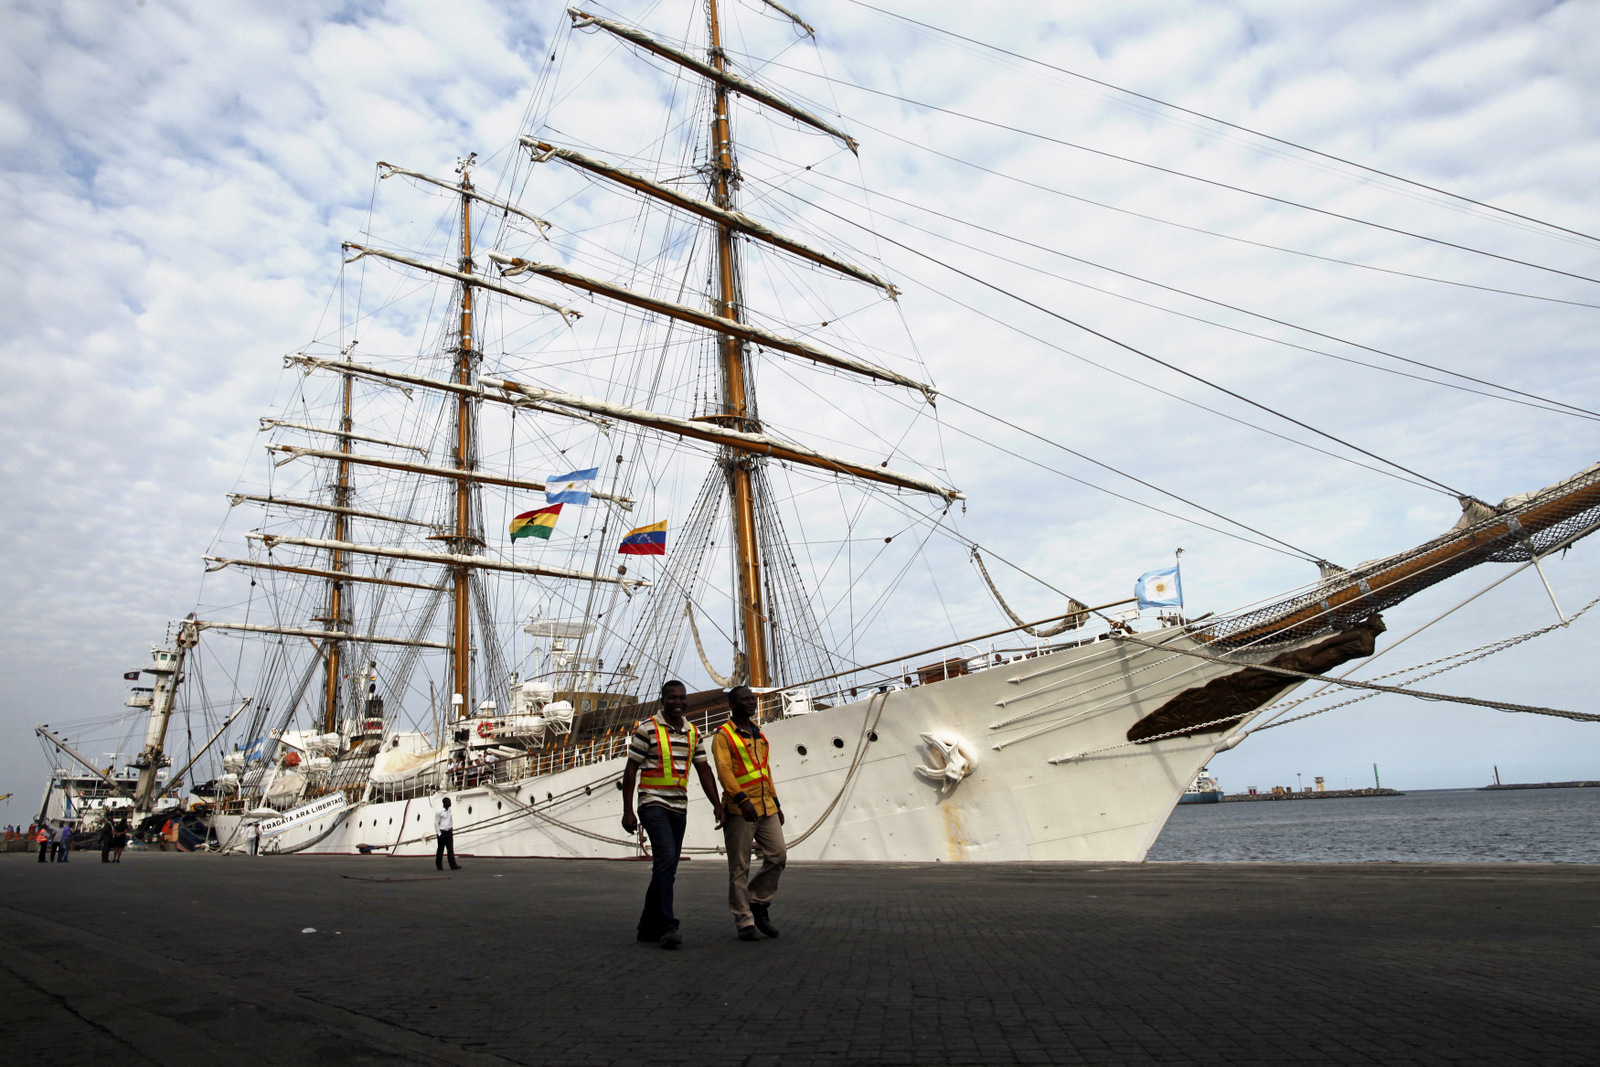 Port workers walk past the three-masted ARA Libertad, a symbol of Argentina's navy, as it lies docked at the port in Tema, outside Accra, Ghana, Oct. 23, 2012. (AP/Gabriela Barnuevo)